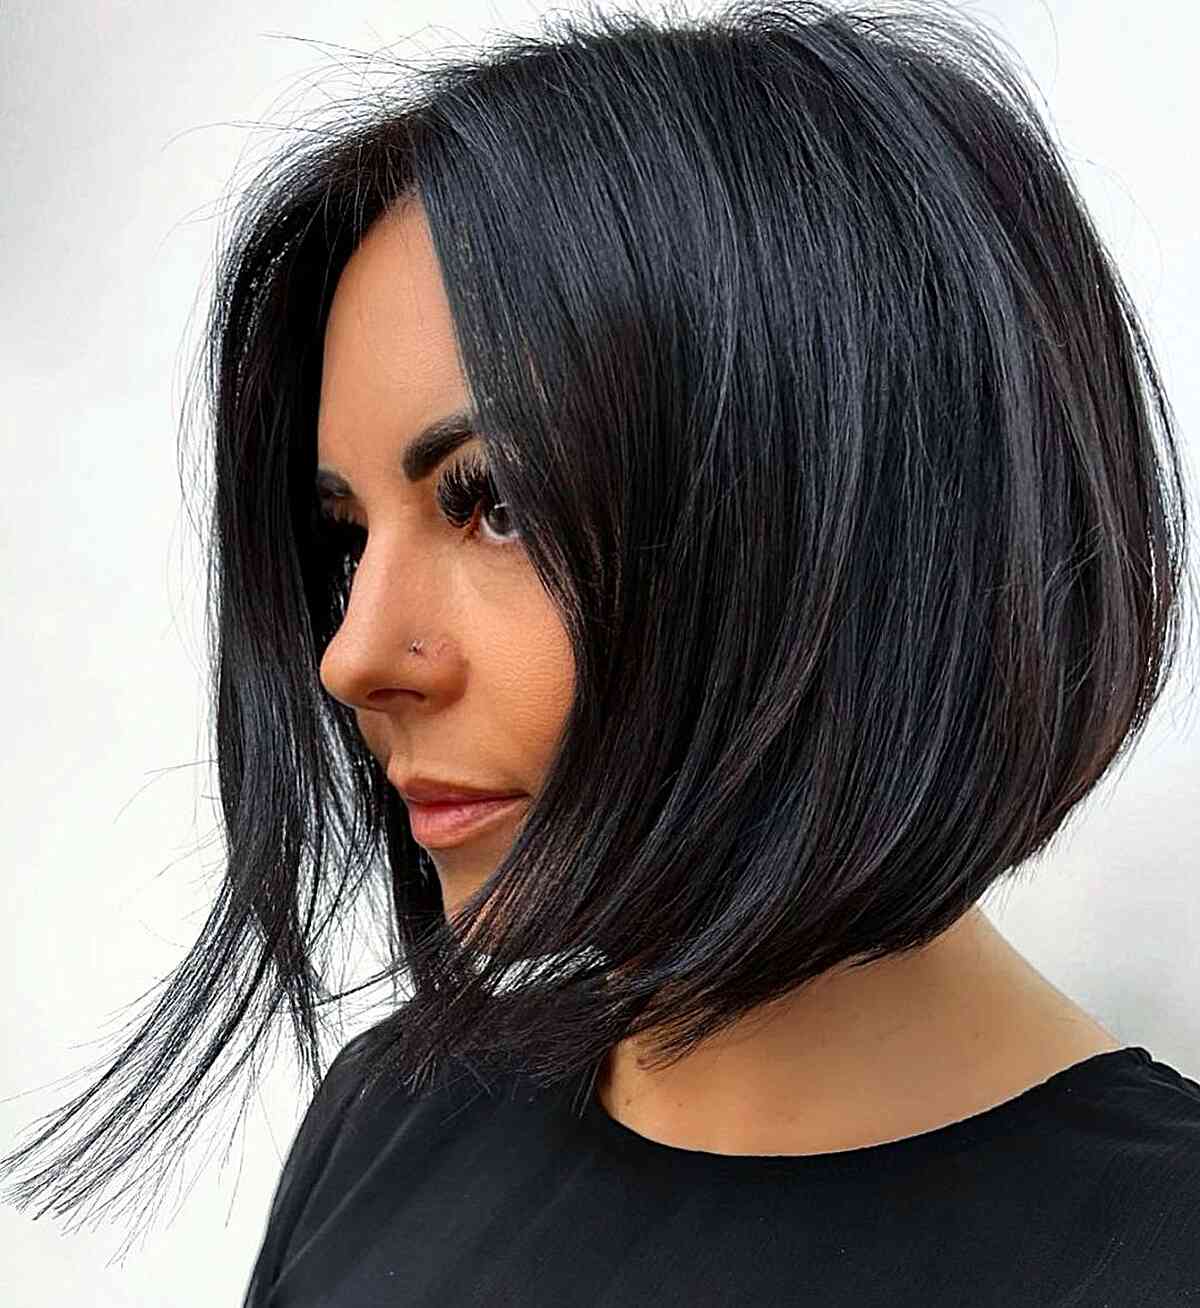 Jet Black Layered Bob for Very Fine Hair with layers and a slight angle in the back